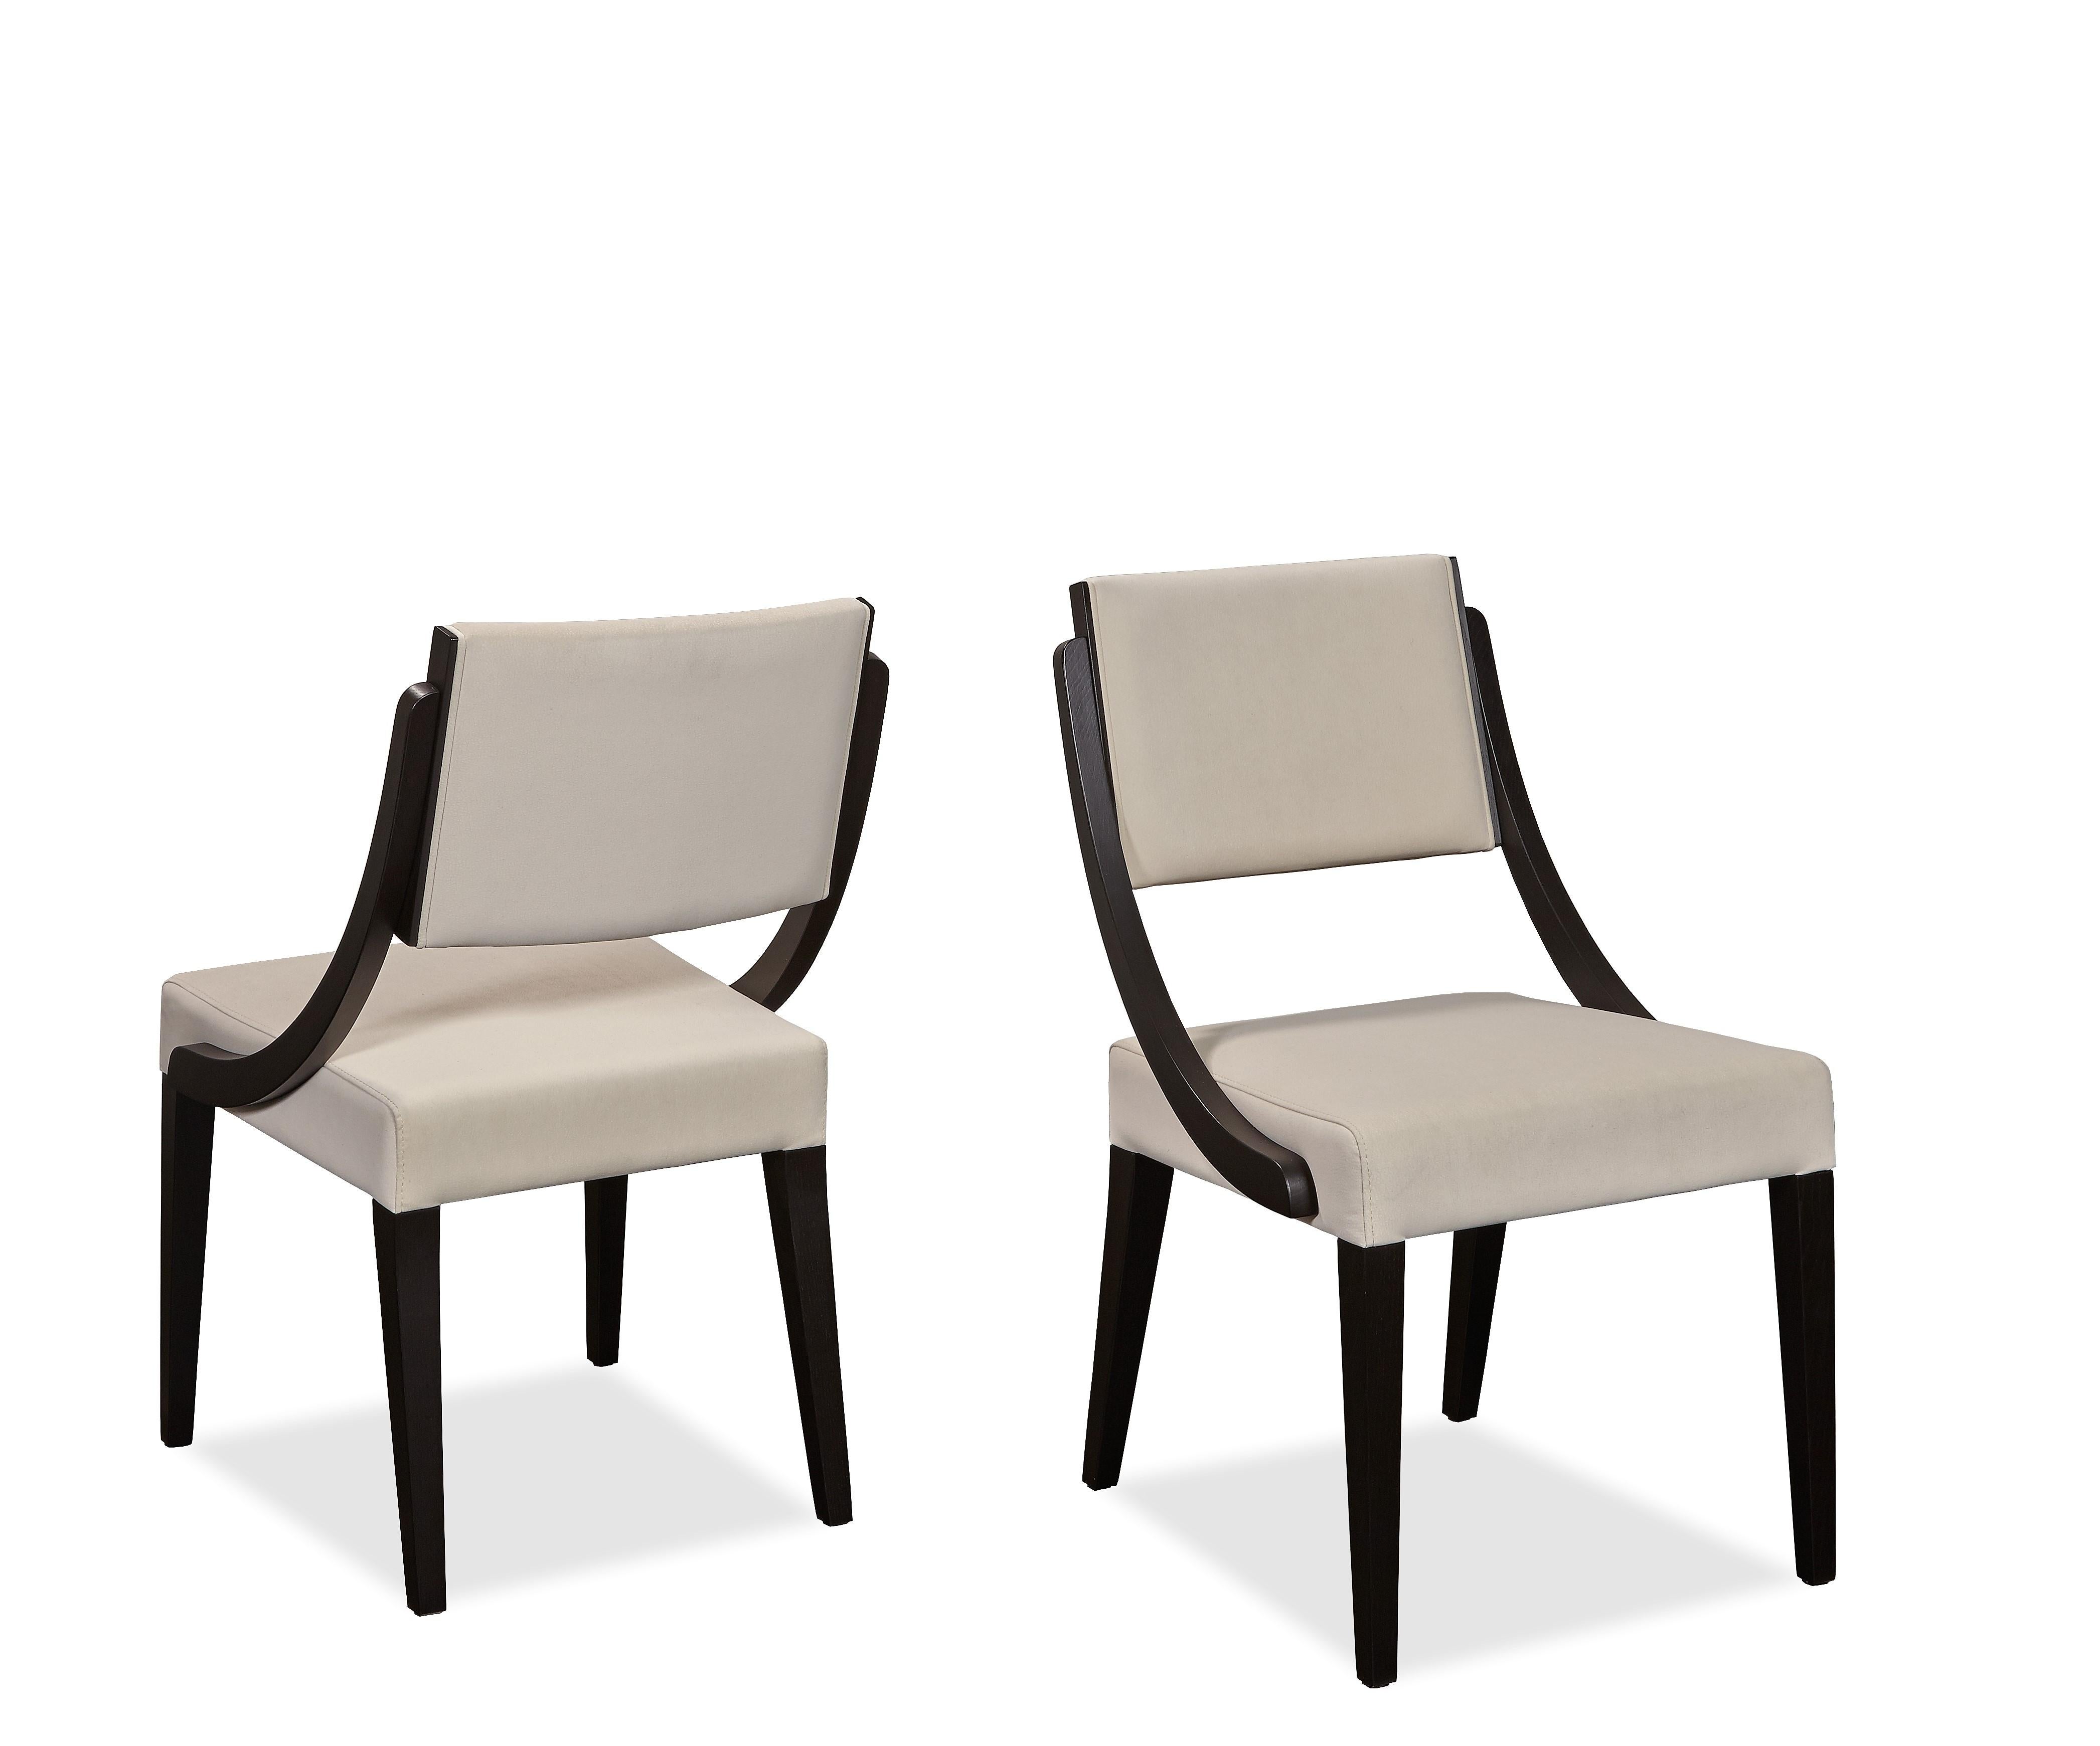 The minimalistic design of the chairs brings a sense of sophistication while maintaining comfort. Constructed in
black oak frame and upholstered in high quality cream leather.
100% European handmade product.
Available in COM and variety of wood and